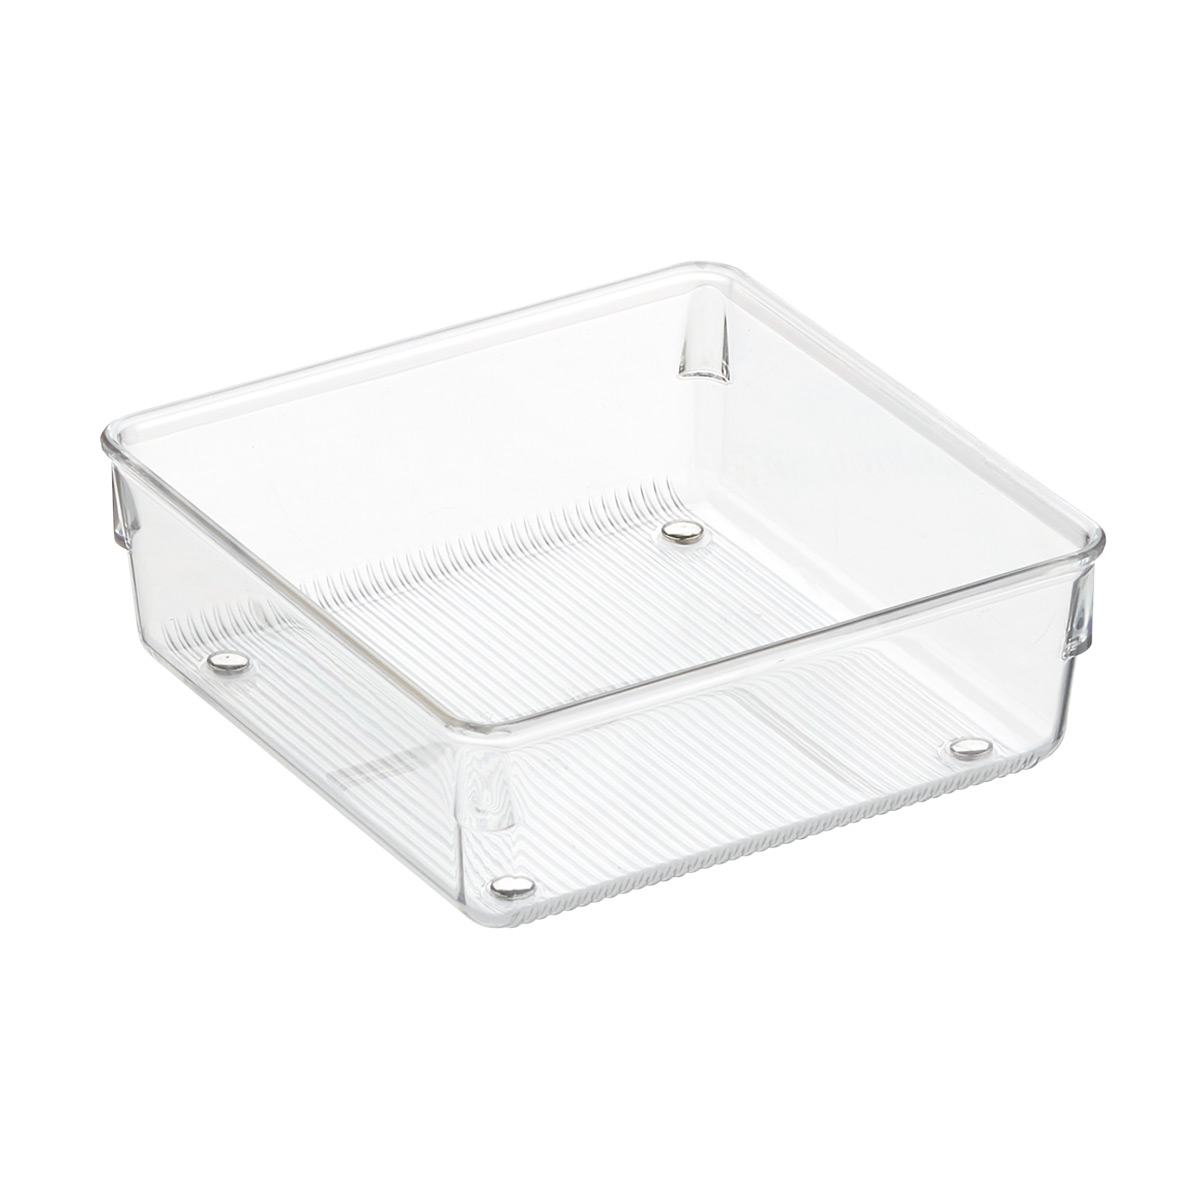 https://www.containerstore.com/catalogimages/348697/10037081-linus-shallow-drawer-organi.jpg